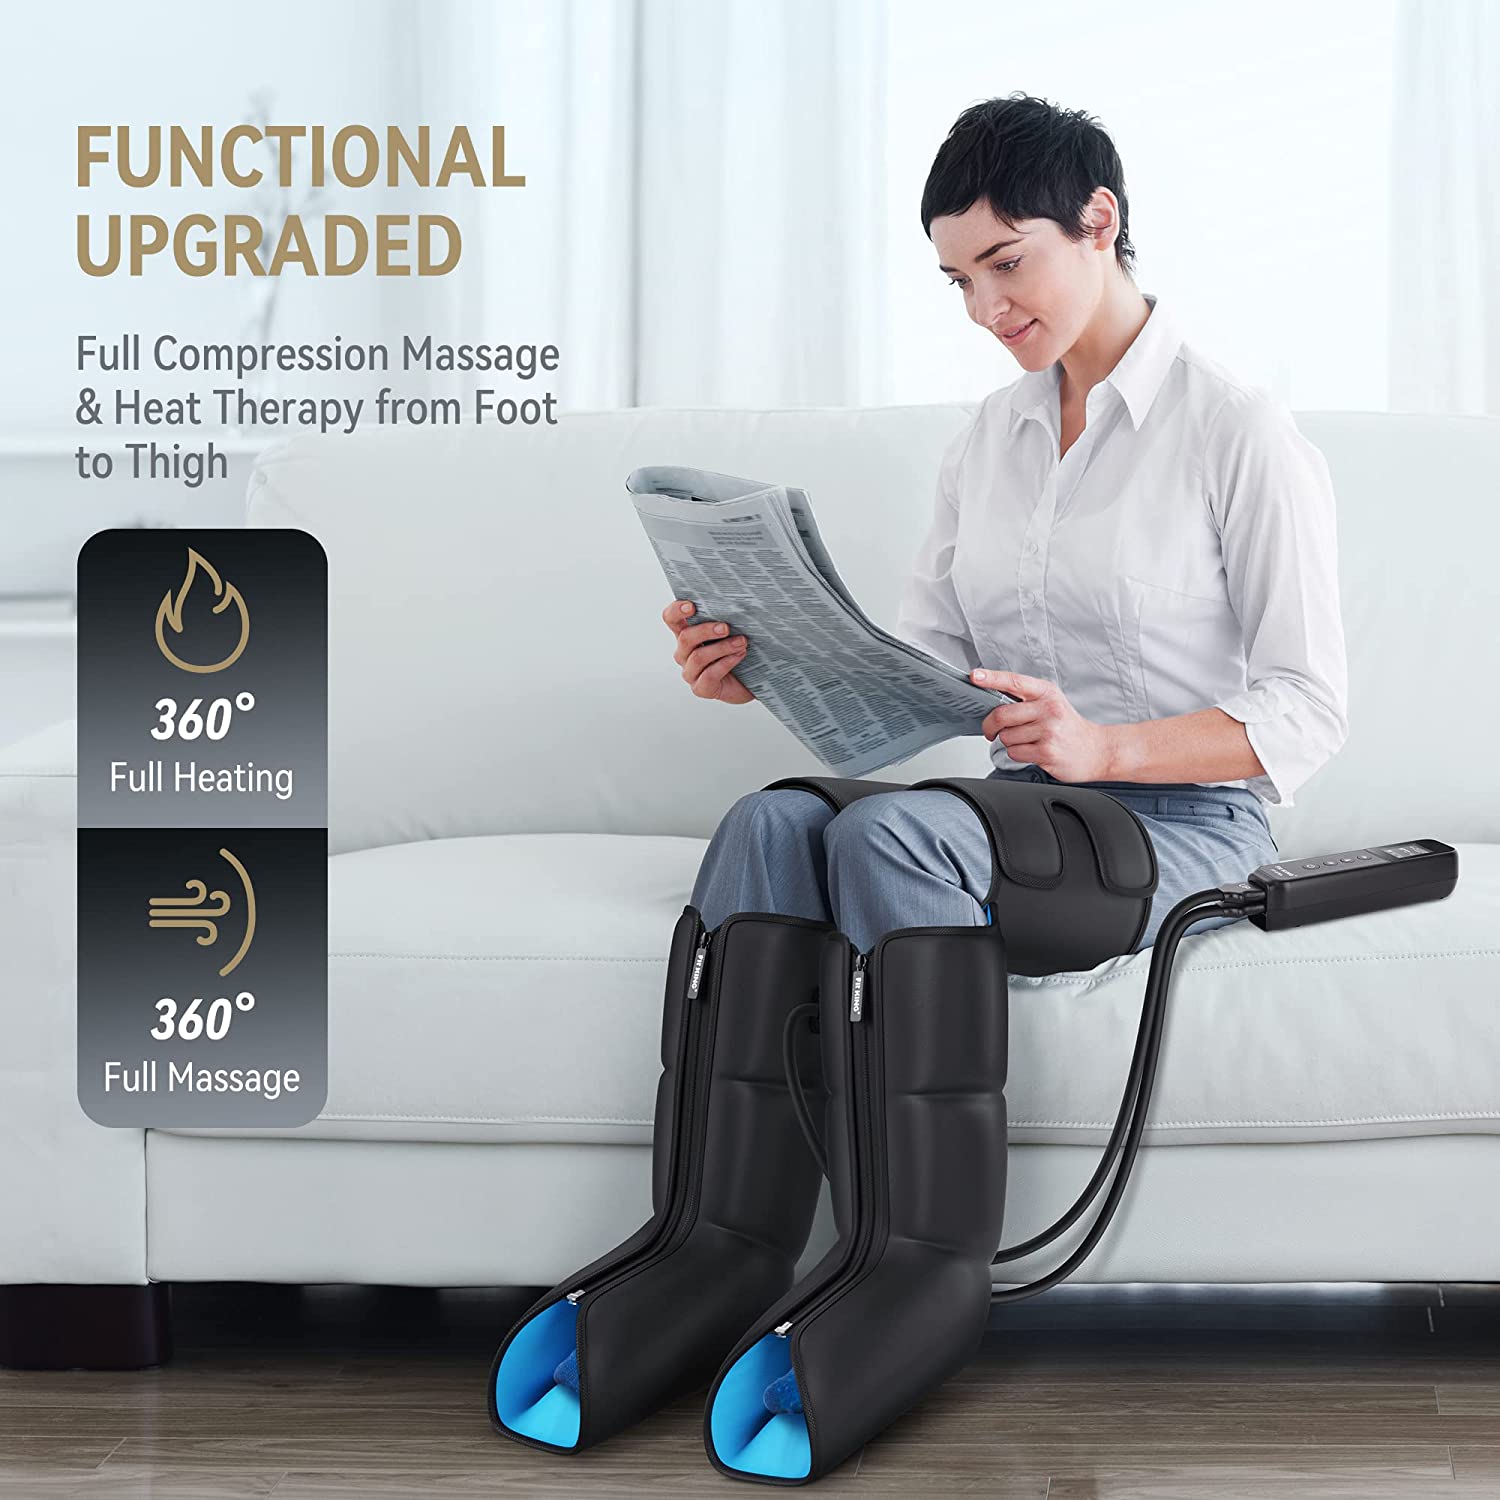 FIT KING Premium Full Leg Massager with Heat | FT-076A